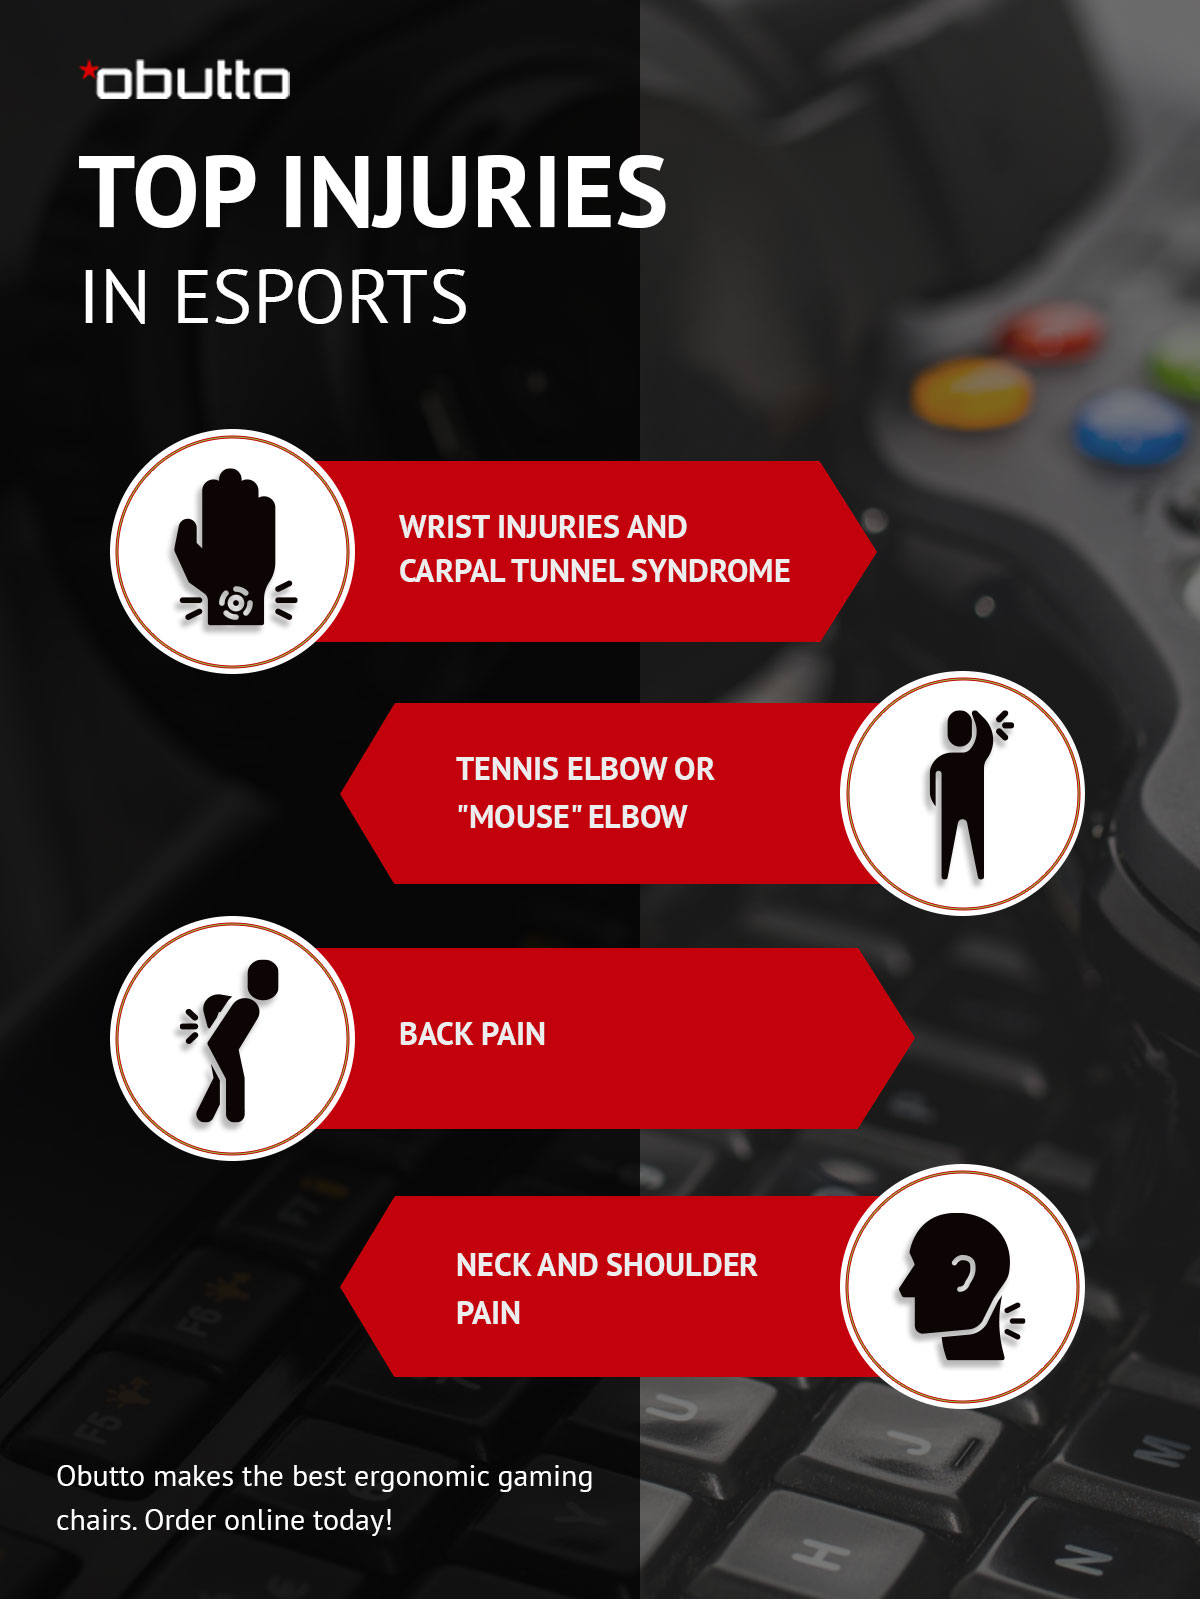 Top Injuries in Esports infographic